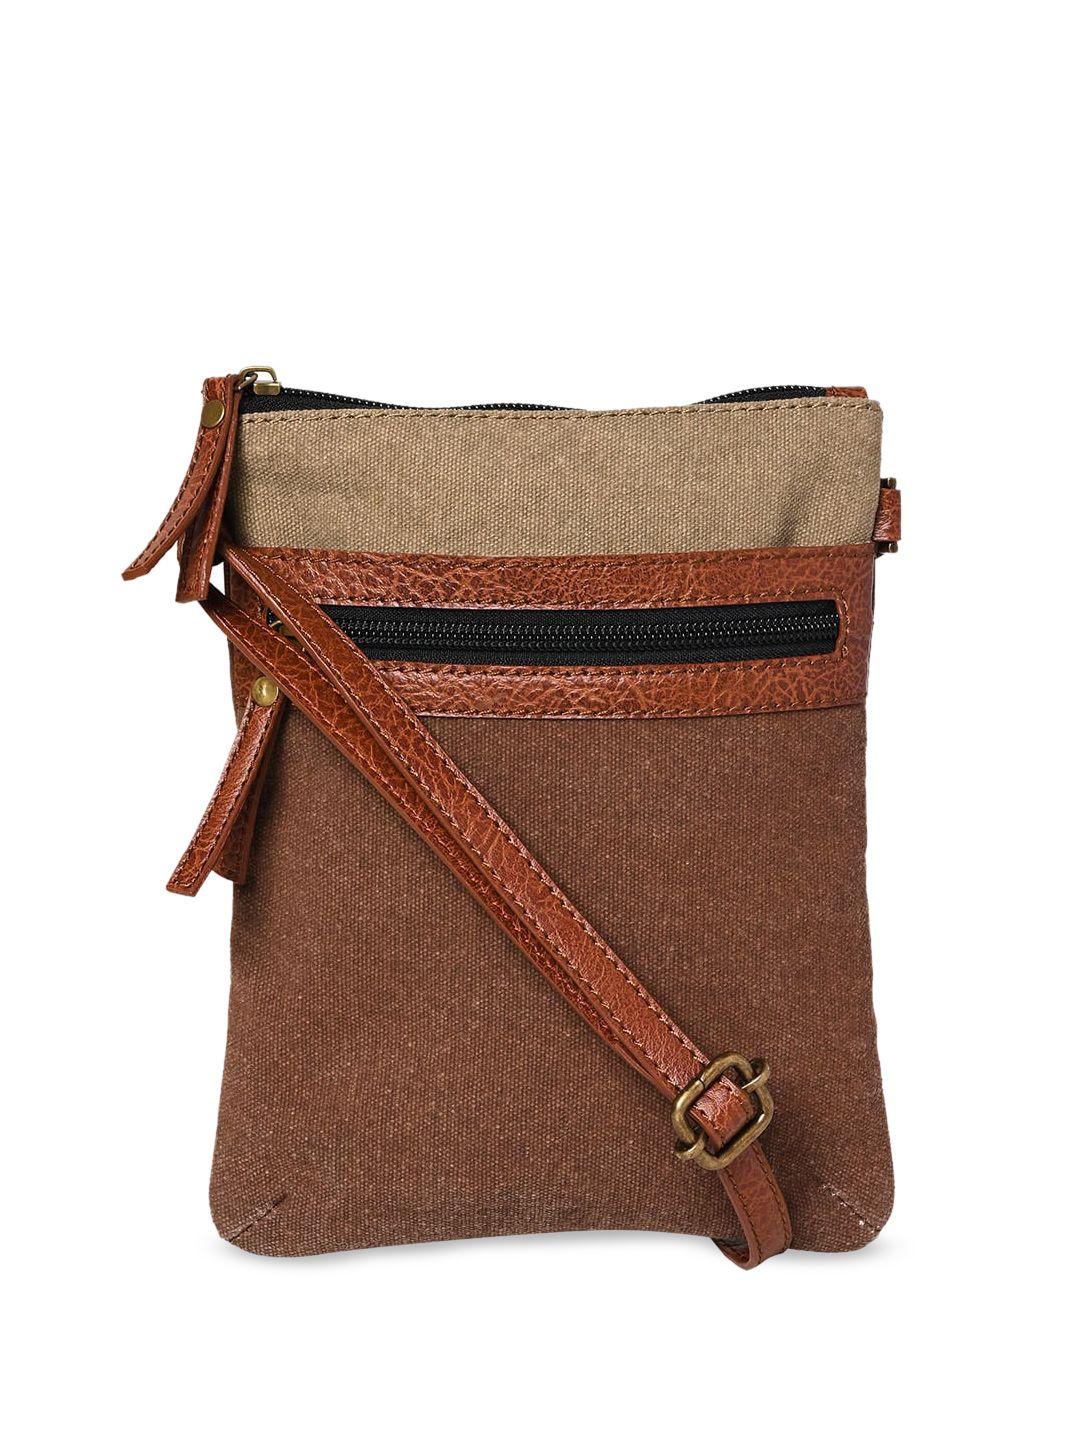 mona-b-brown-swagger-sling-bag-with-tasselled